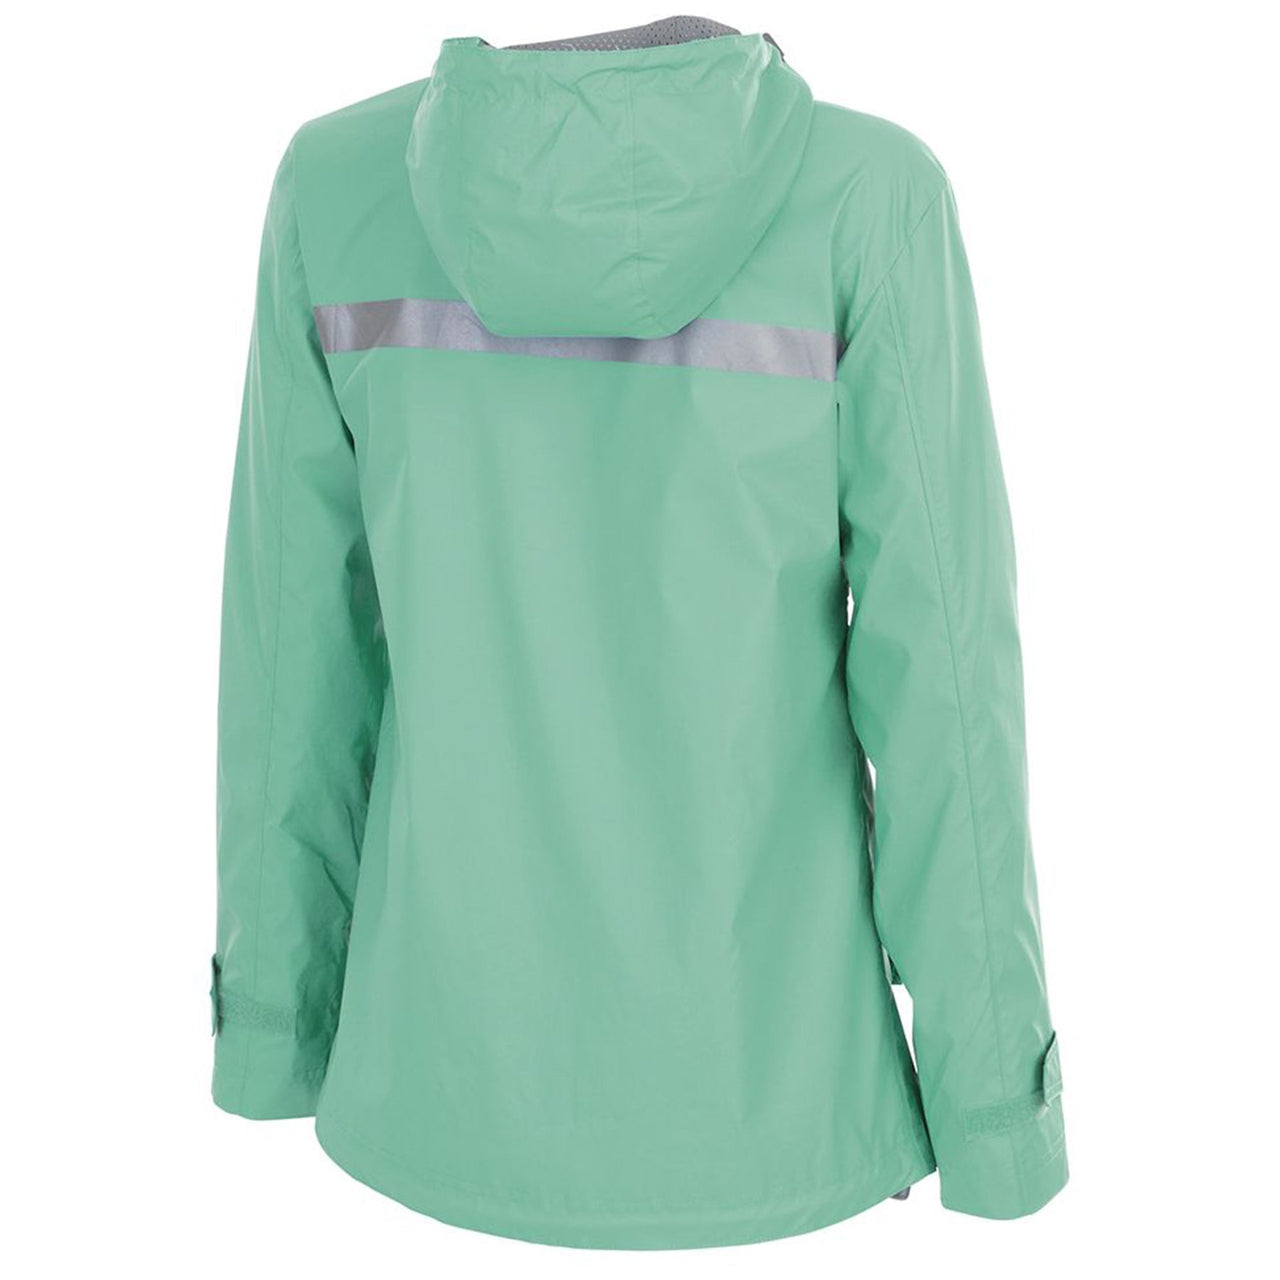 the hood of the women's mint reflective windbreaker zip-up is mint with a reflective band spanning across the width of the shoulder blades